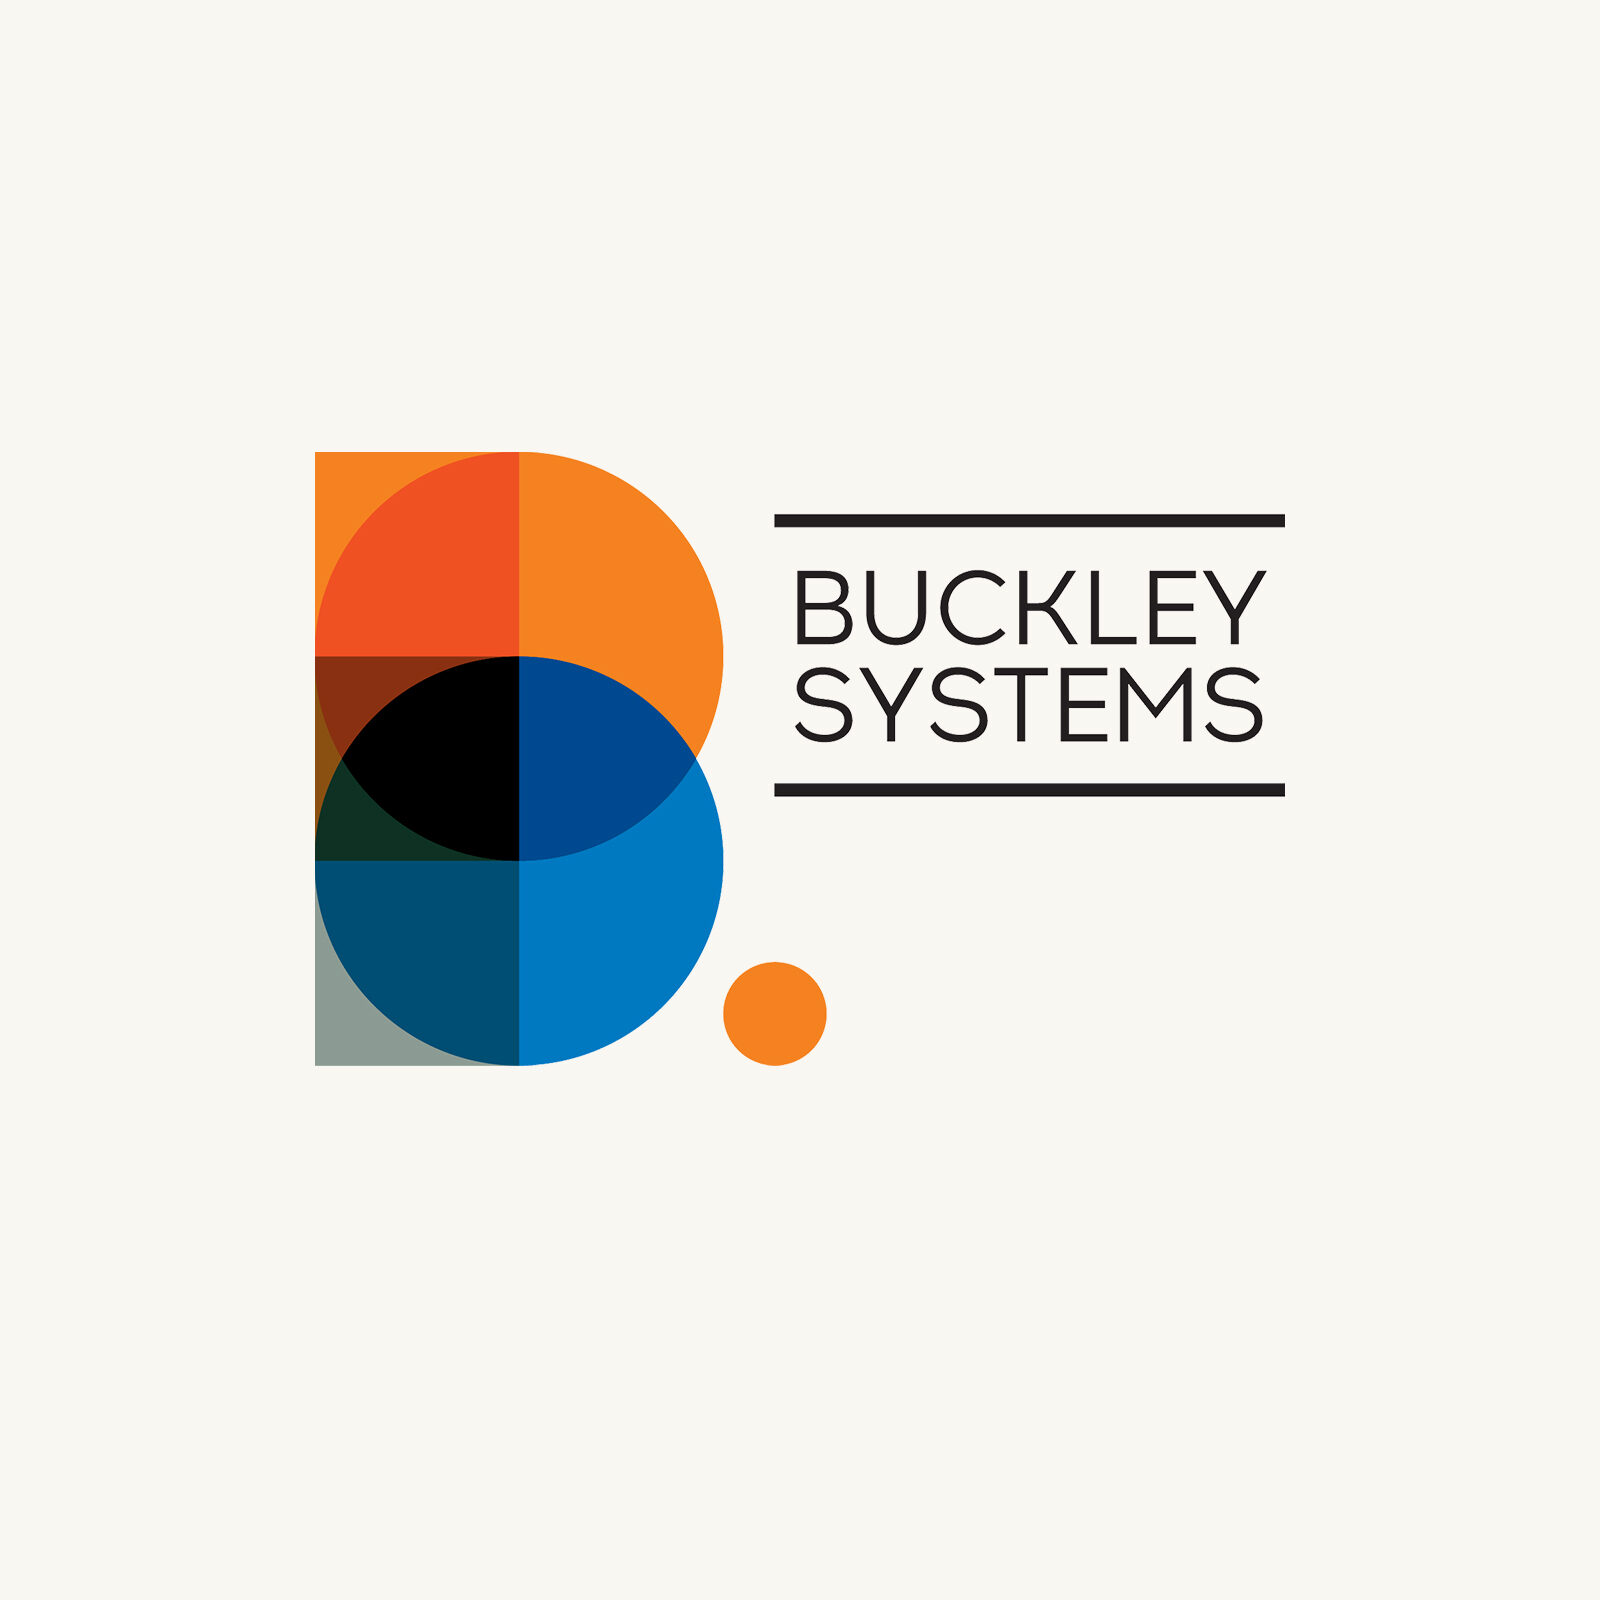 Nick Gooday recently appointed as Purchasing Officer at Buckley Systems Ltd.